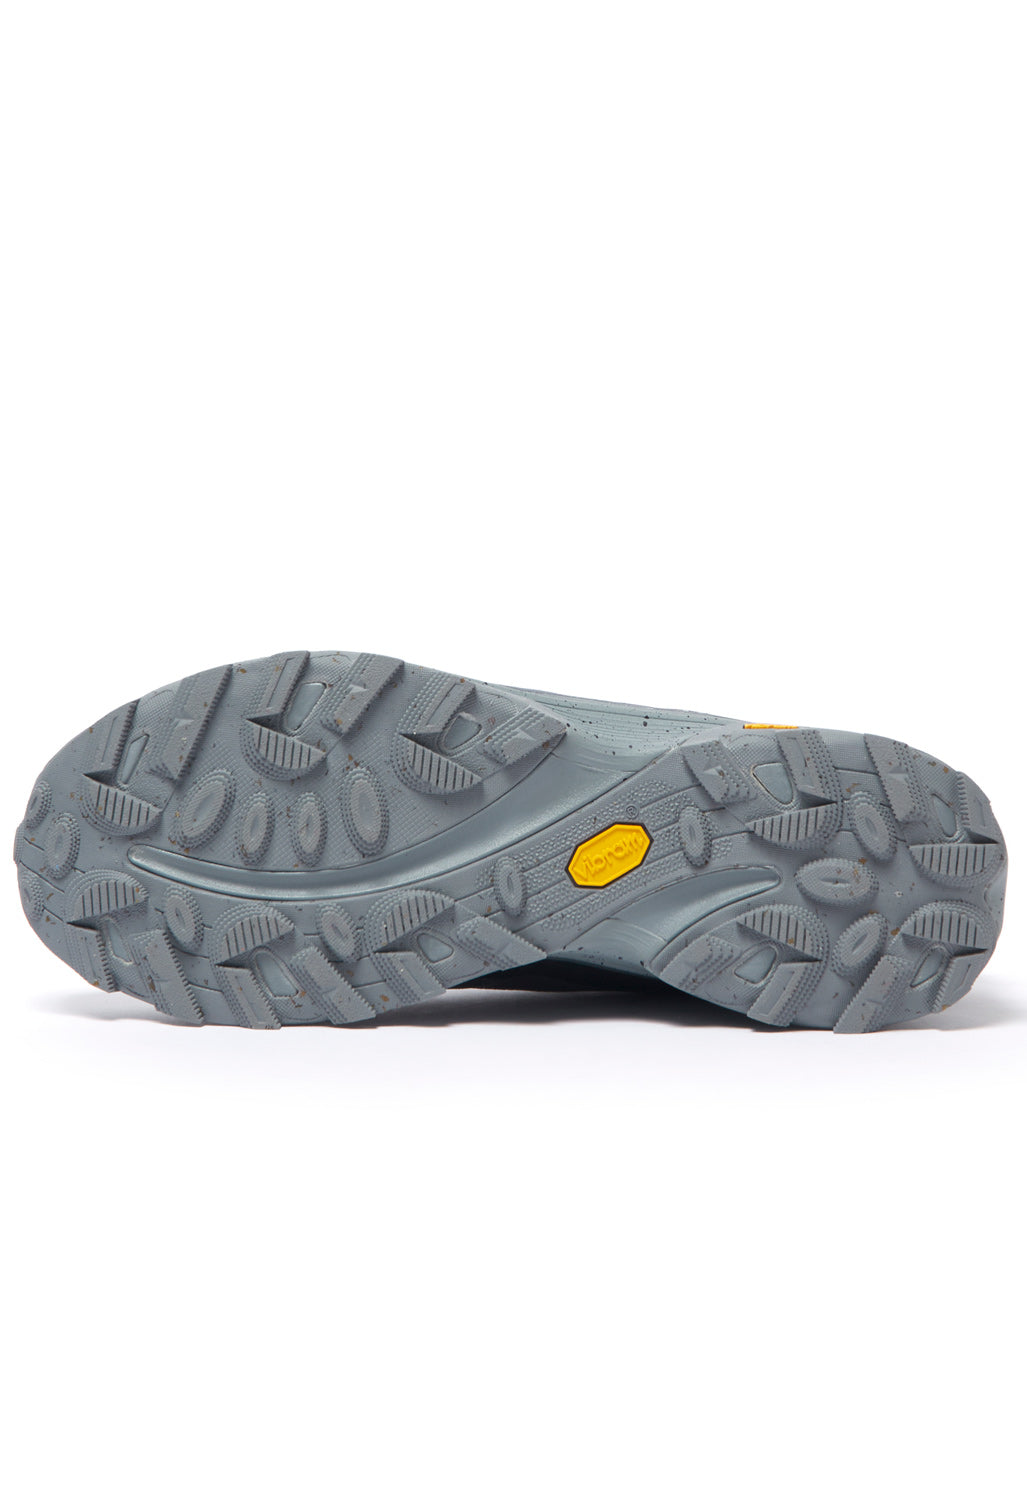 Merrell Moab Speed GORE-TEX 1TRL Shoes - Monument